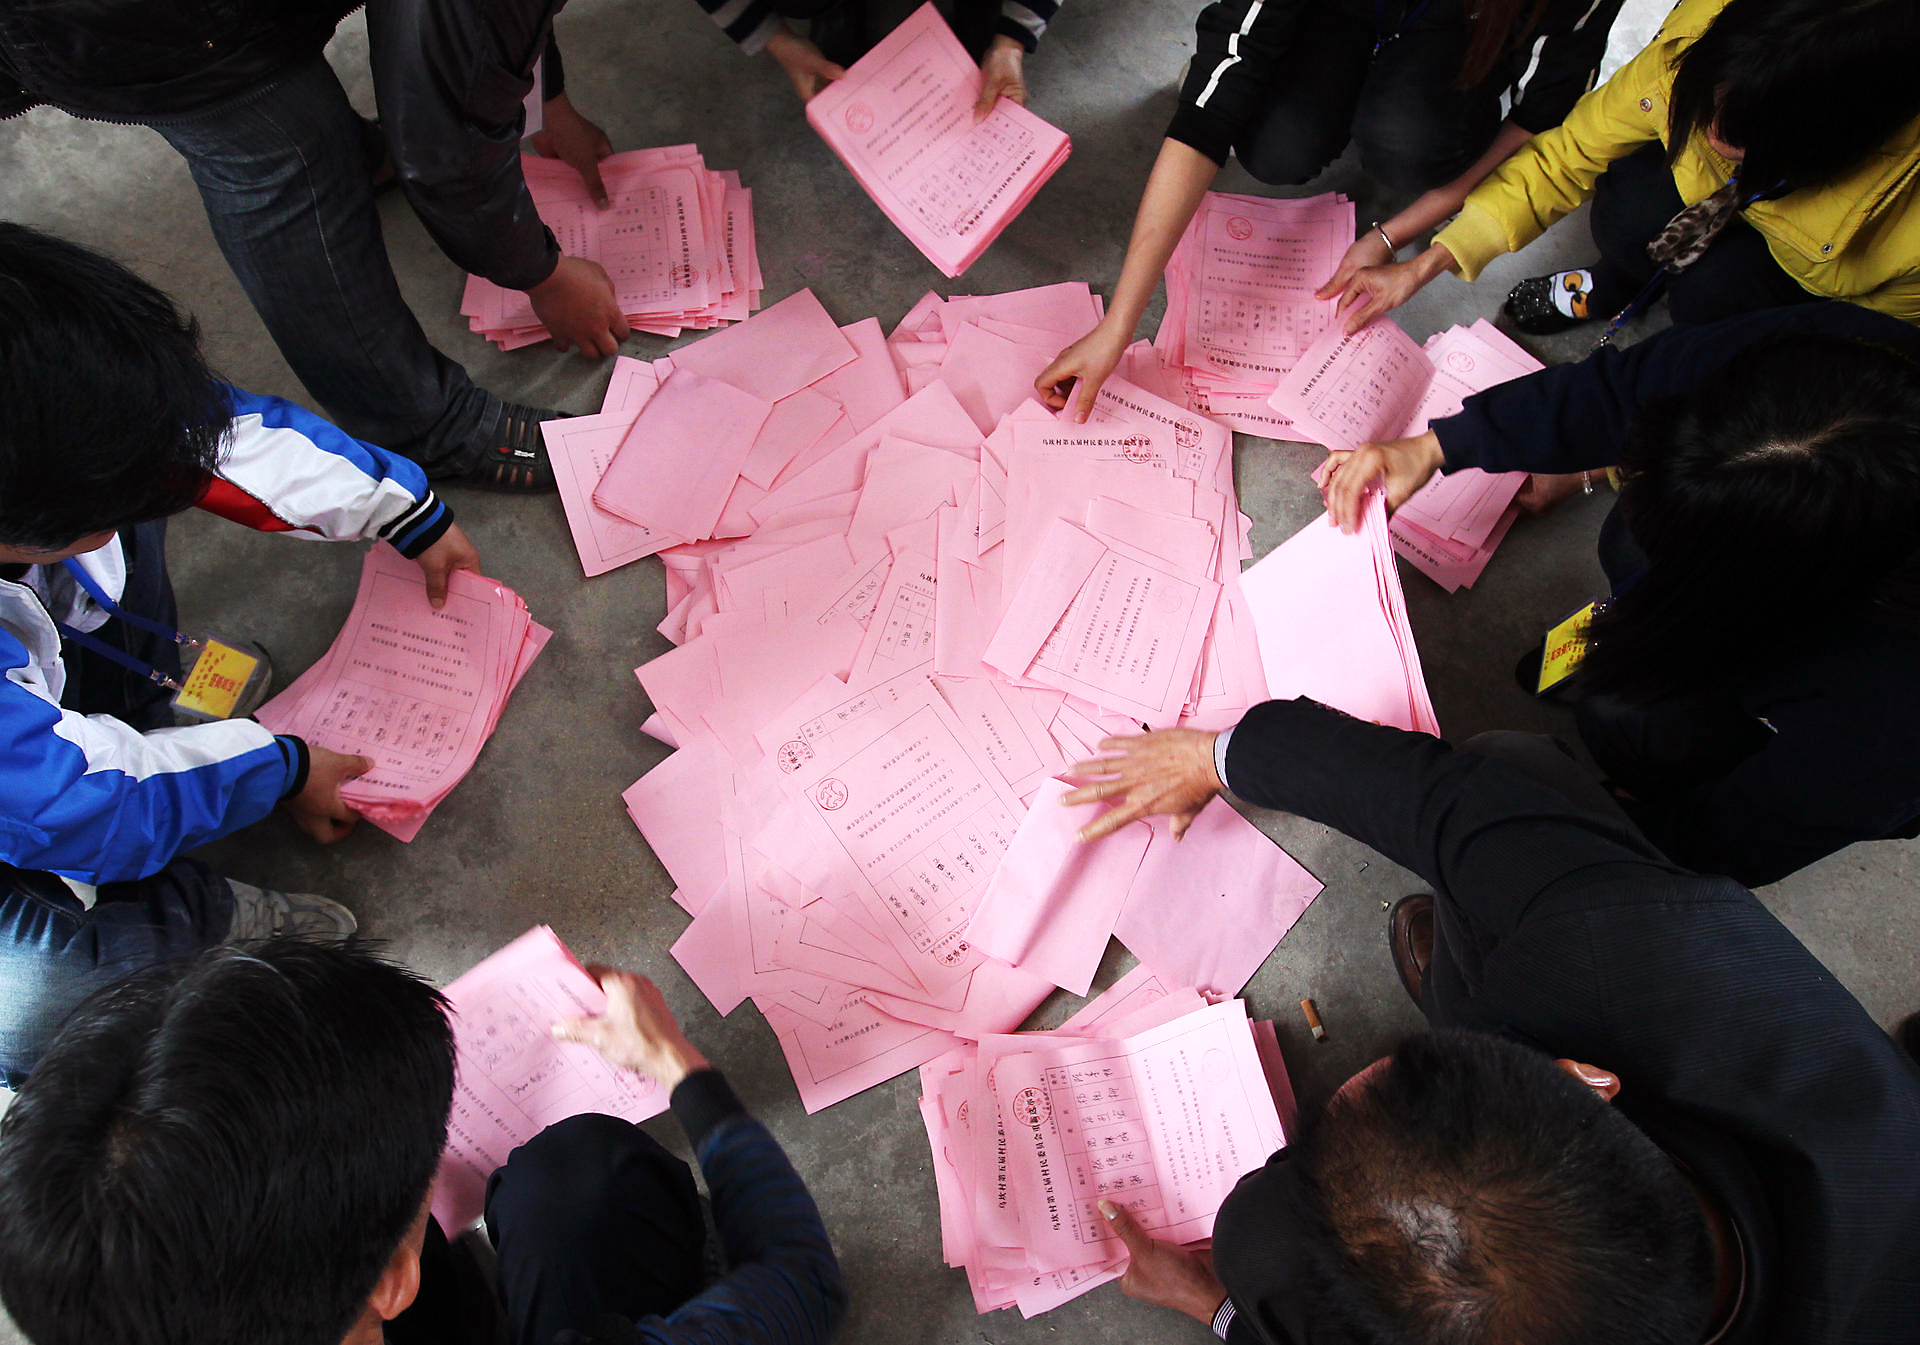 Ballots lie on the floor after the village committee election in March 2012 in Wukan. Photo: Felix Wong